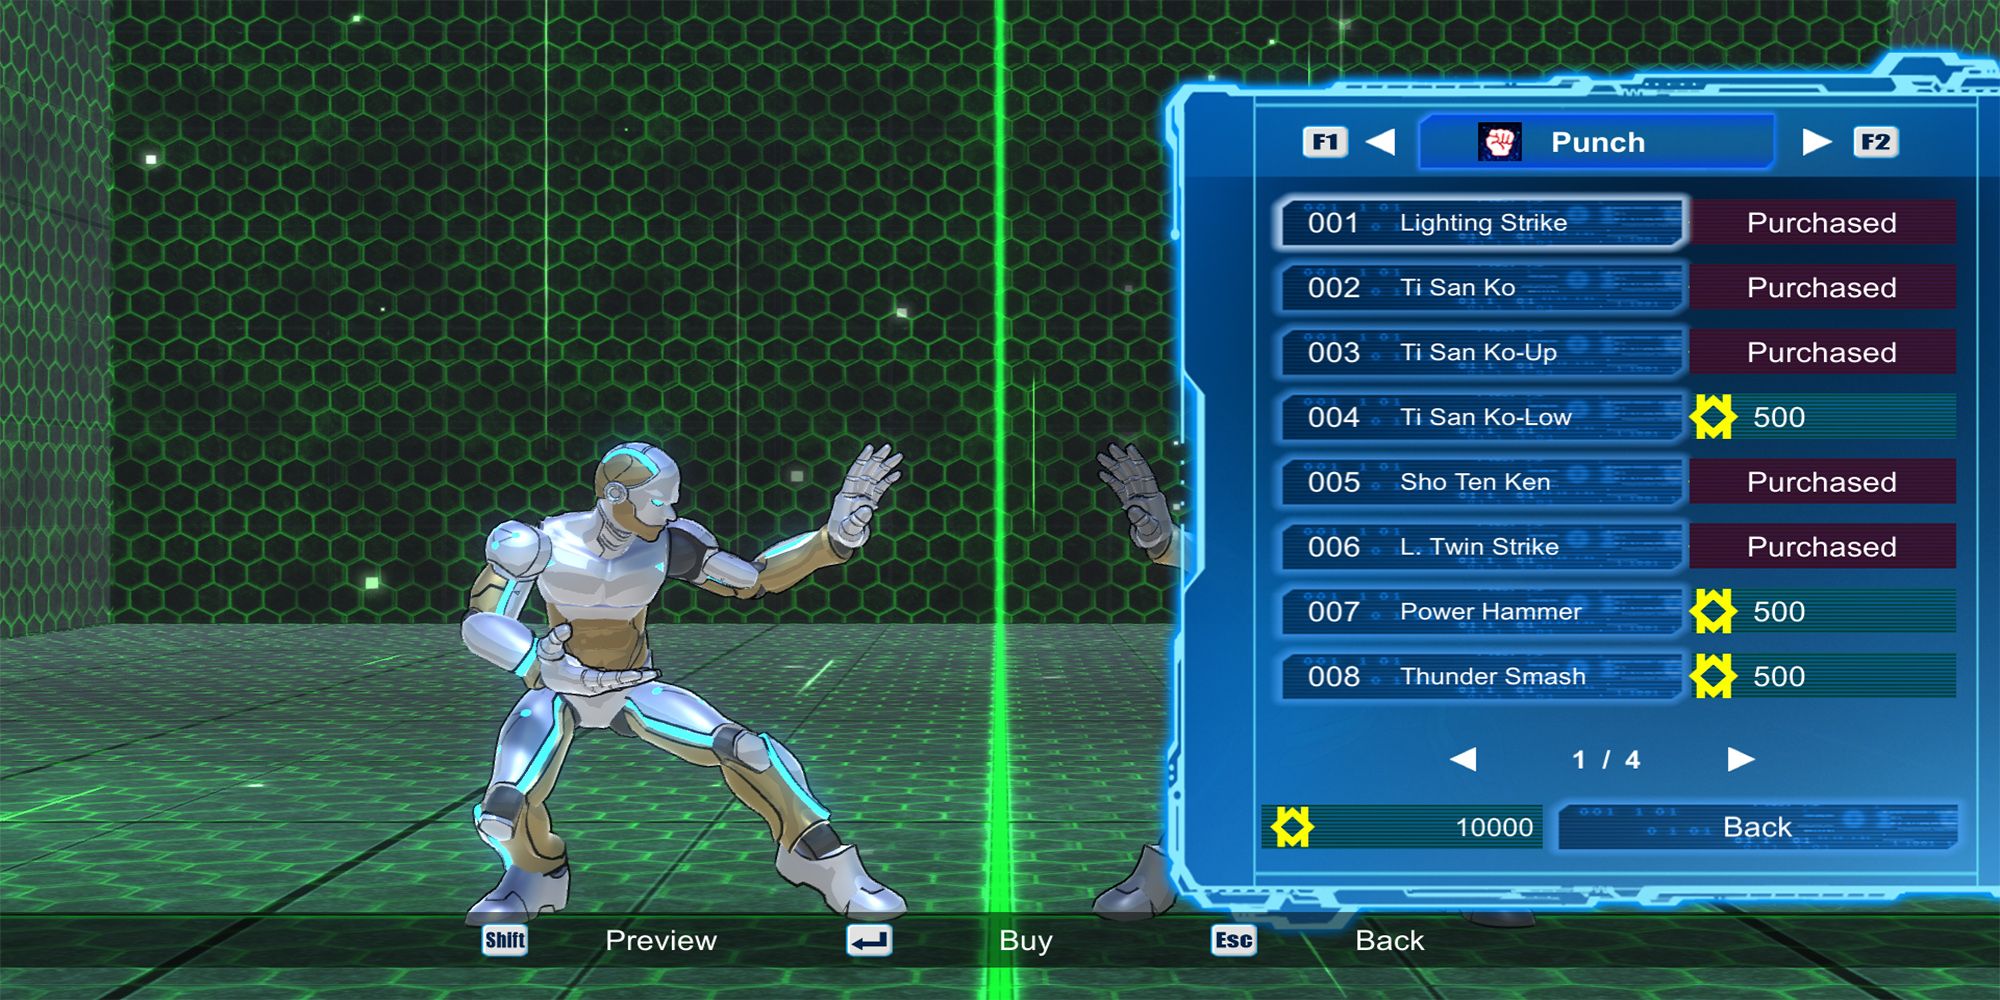 A variety of punch attacks are some of the skills one can purchase in Fight Of Steel's Skill Shop.